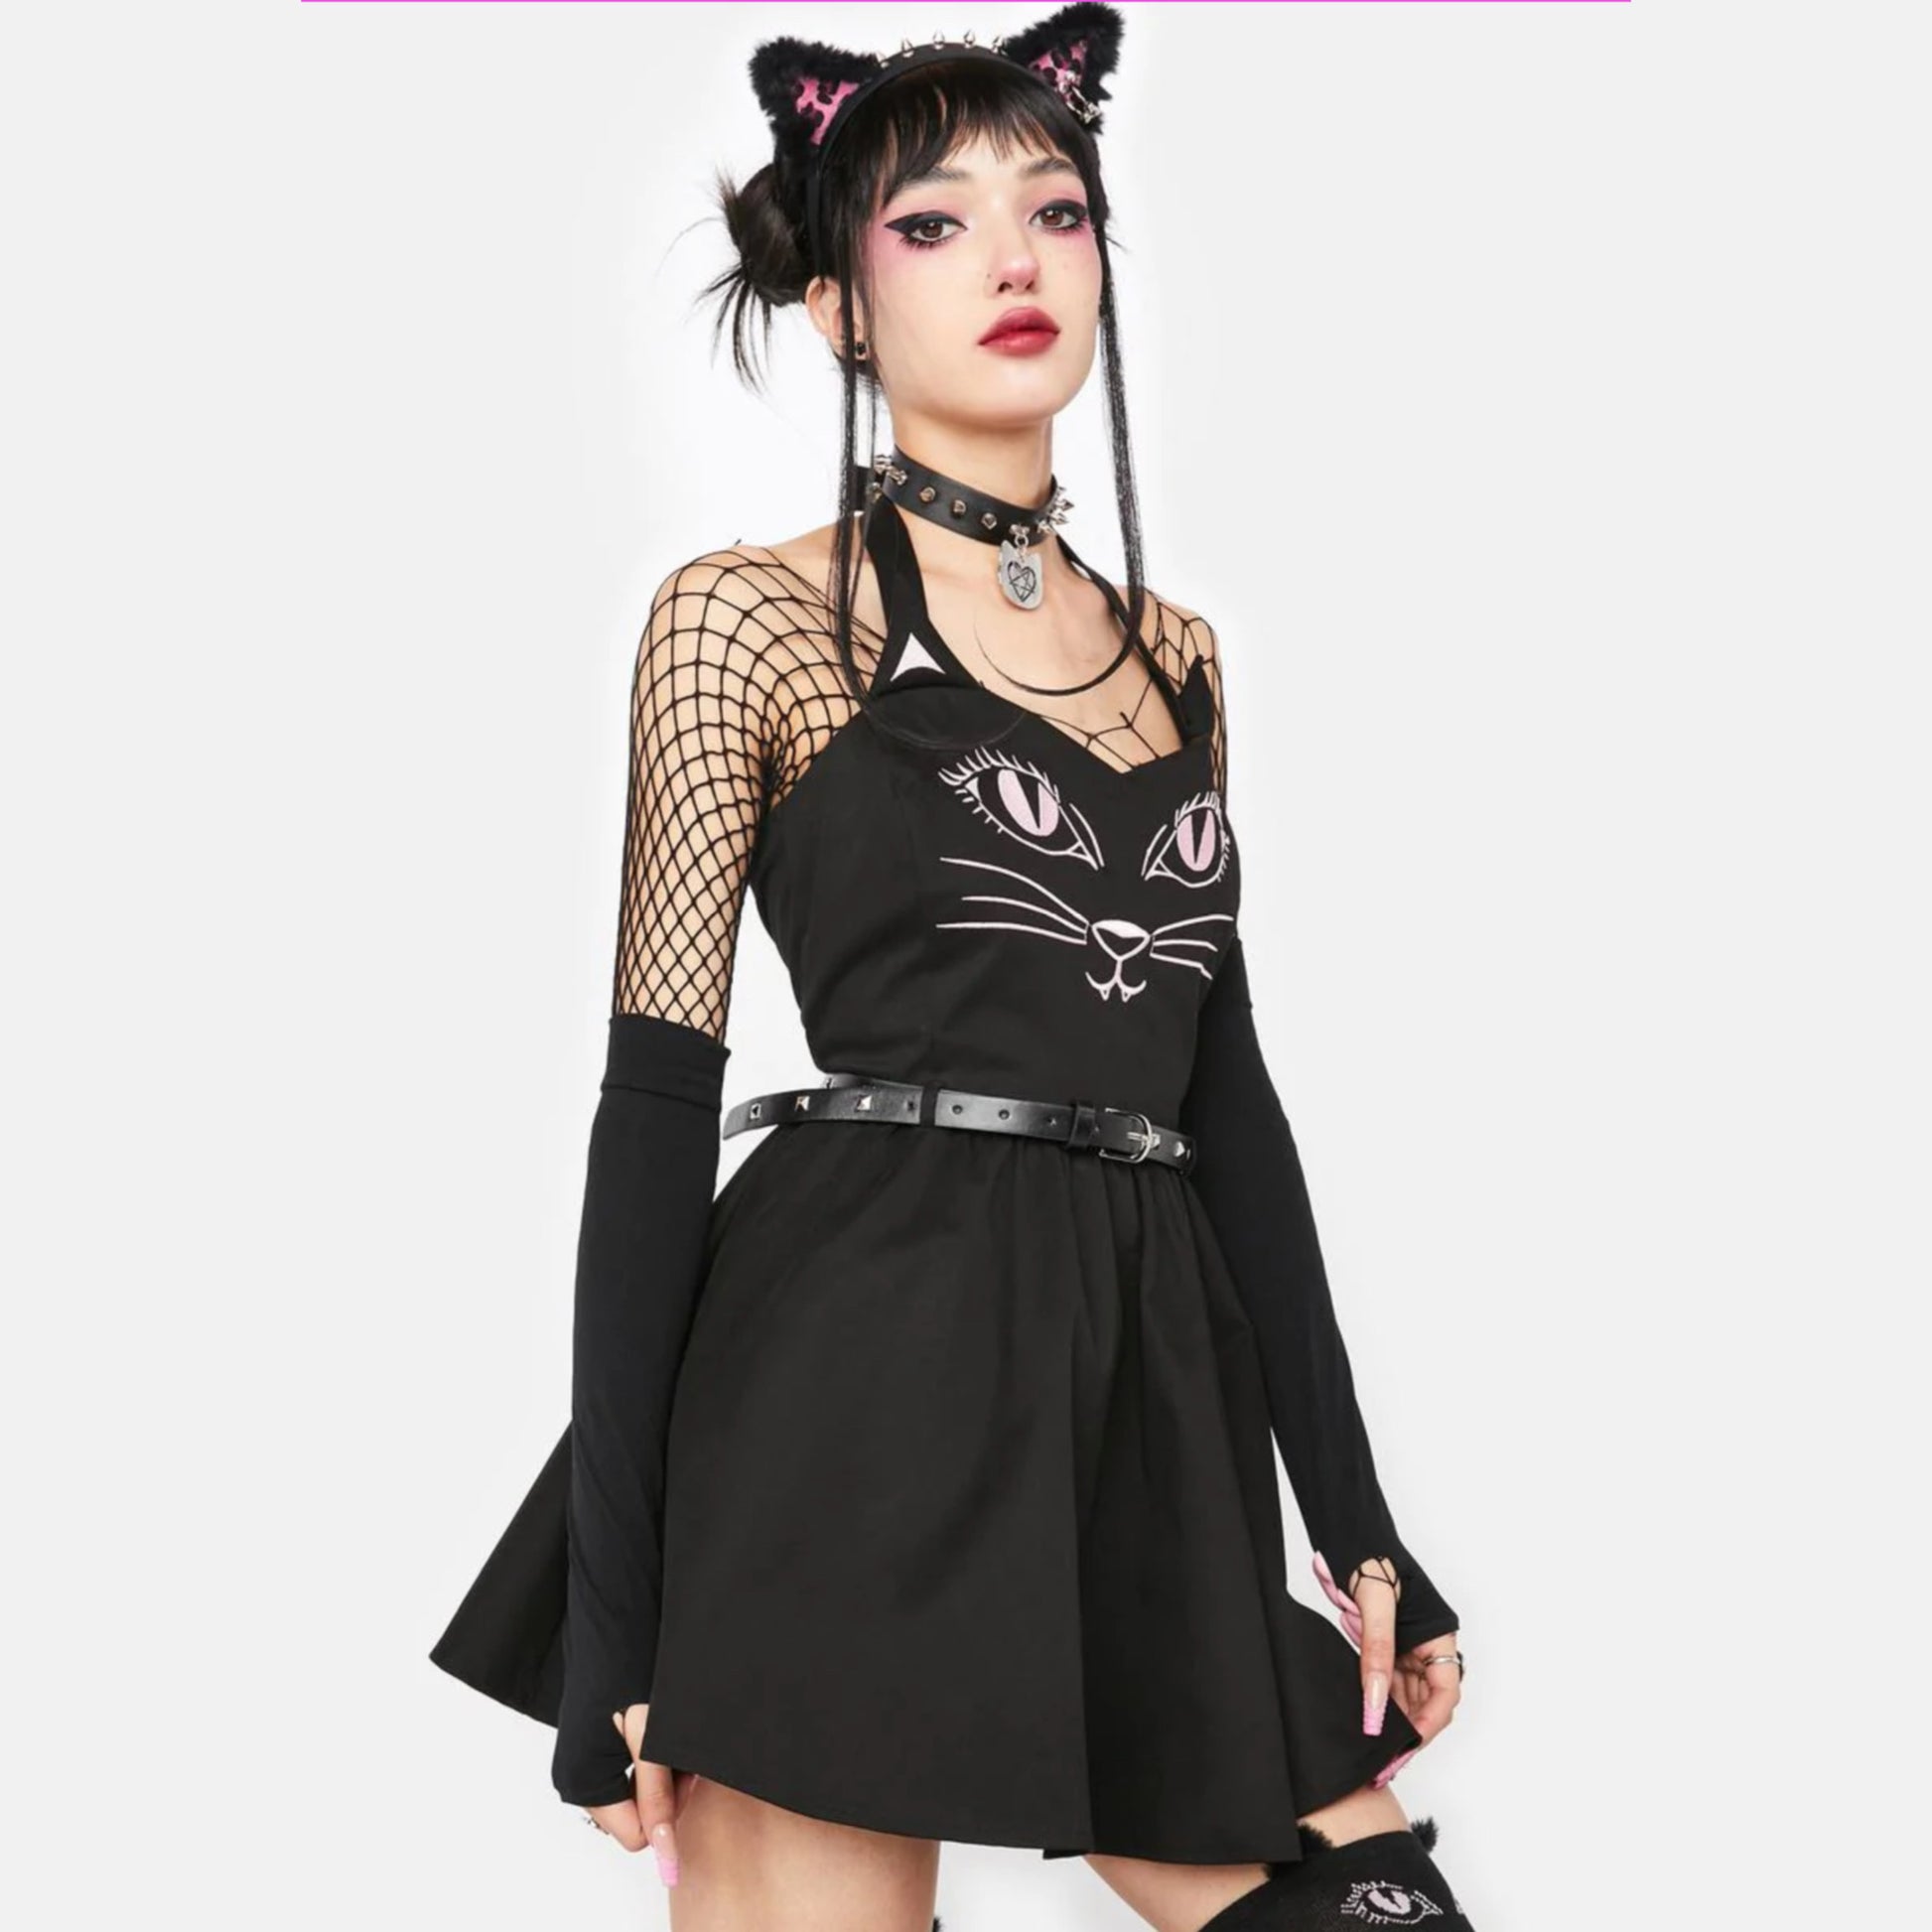 Black Kitty Mini Dress | Puffy Cat Ear Details Embroidered Cat Graphic & Studded Belt - The Grave Girls - Dresses